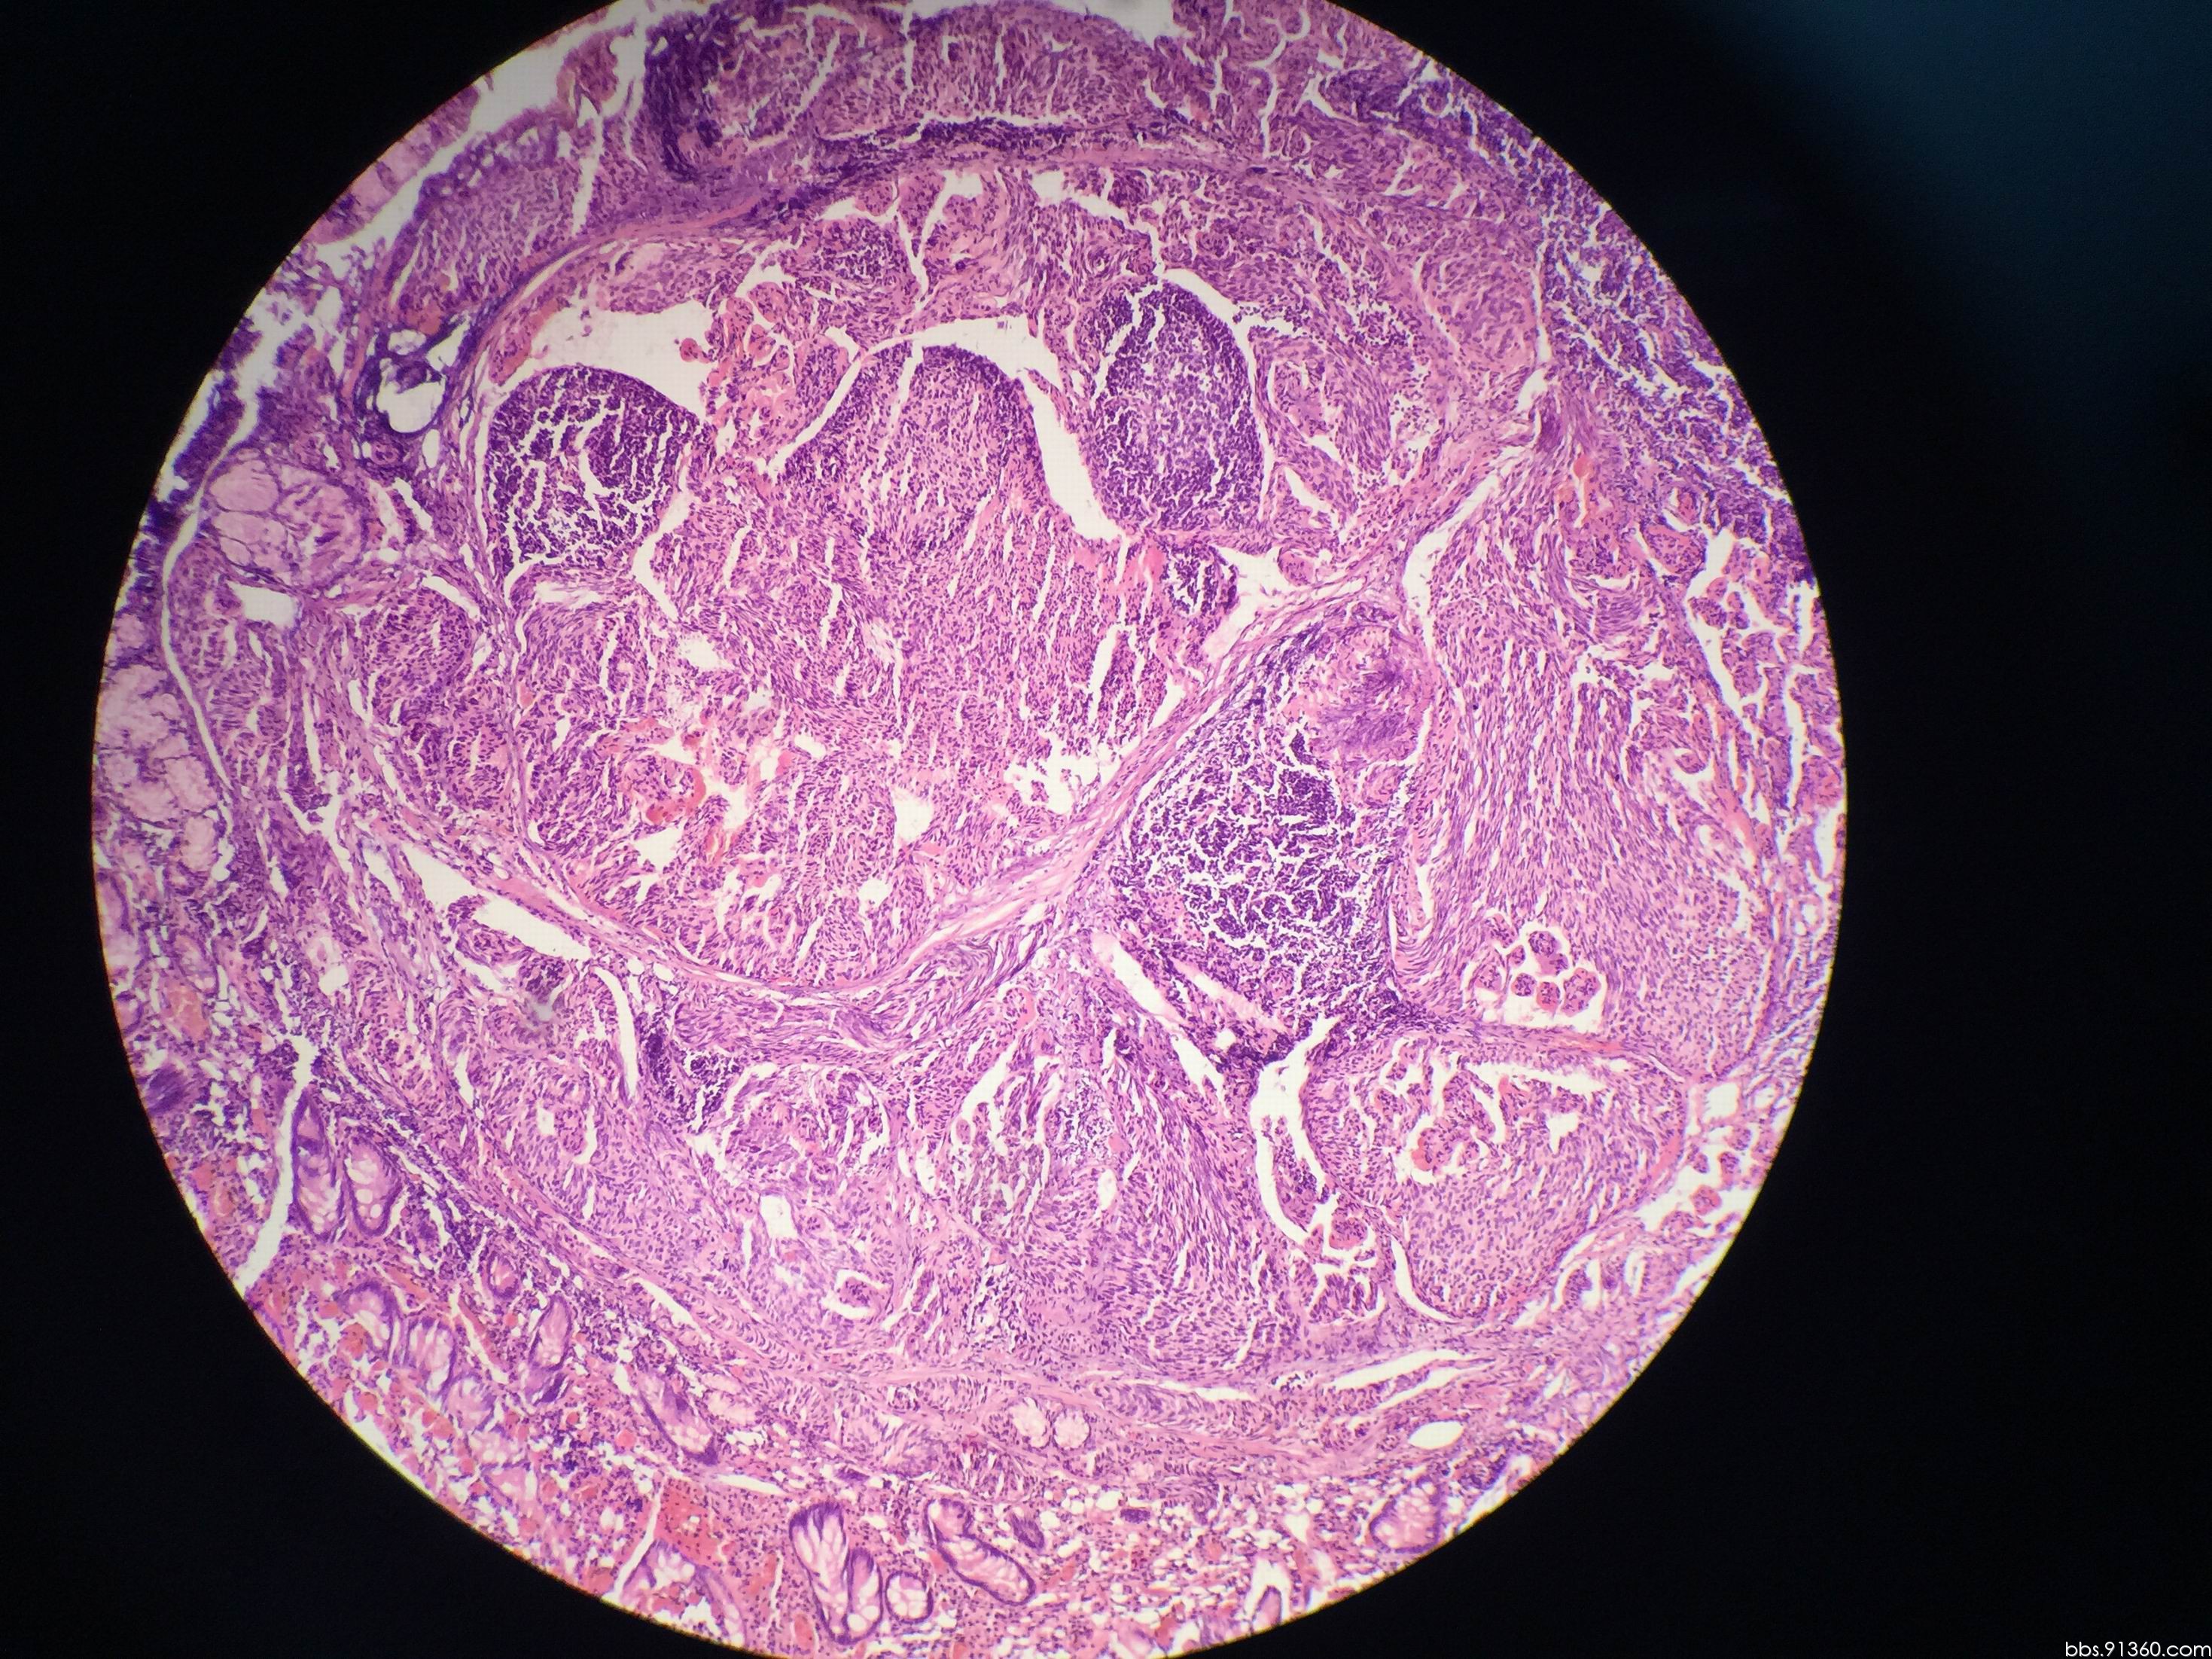 A Patient With Chronic Diarrhea of Unknown Cause - Clinical ...